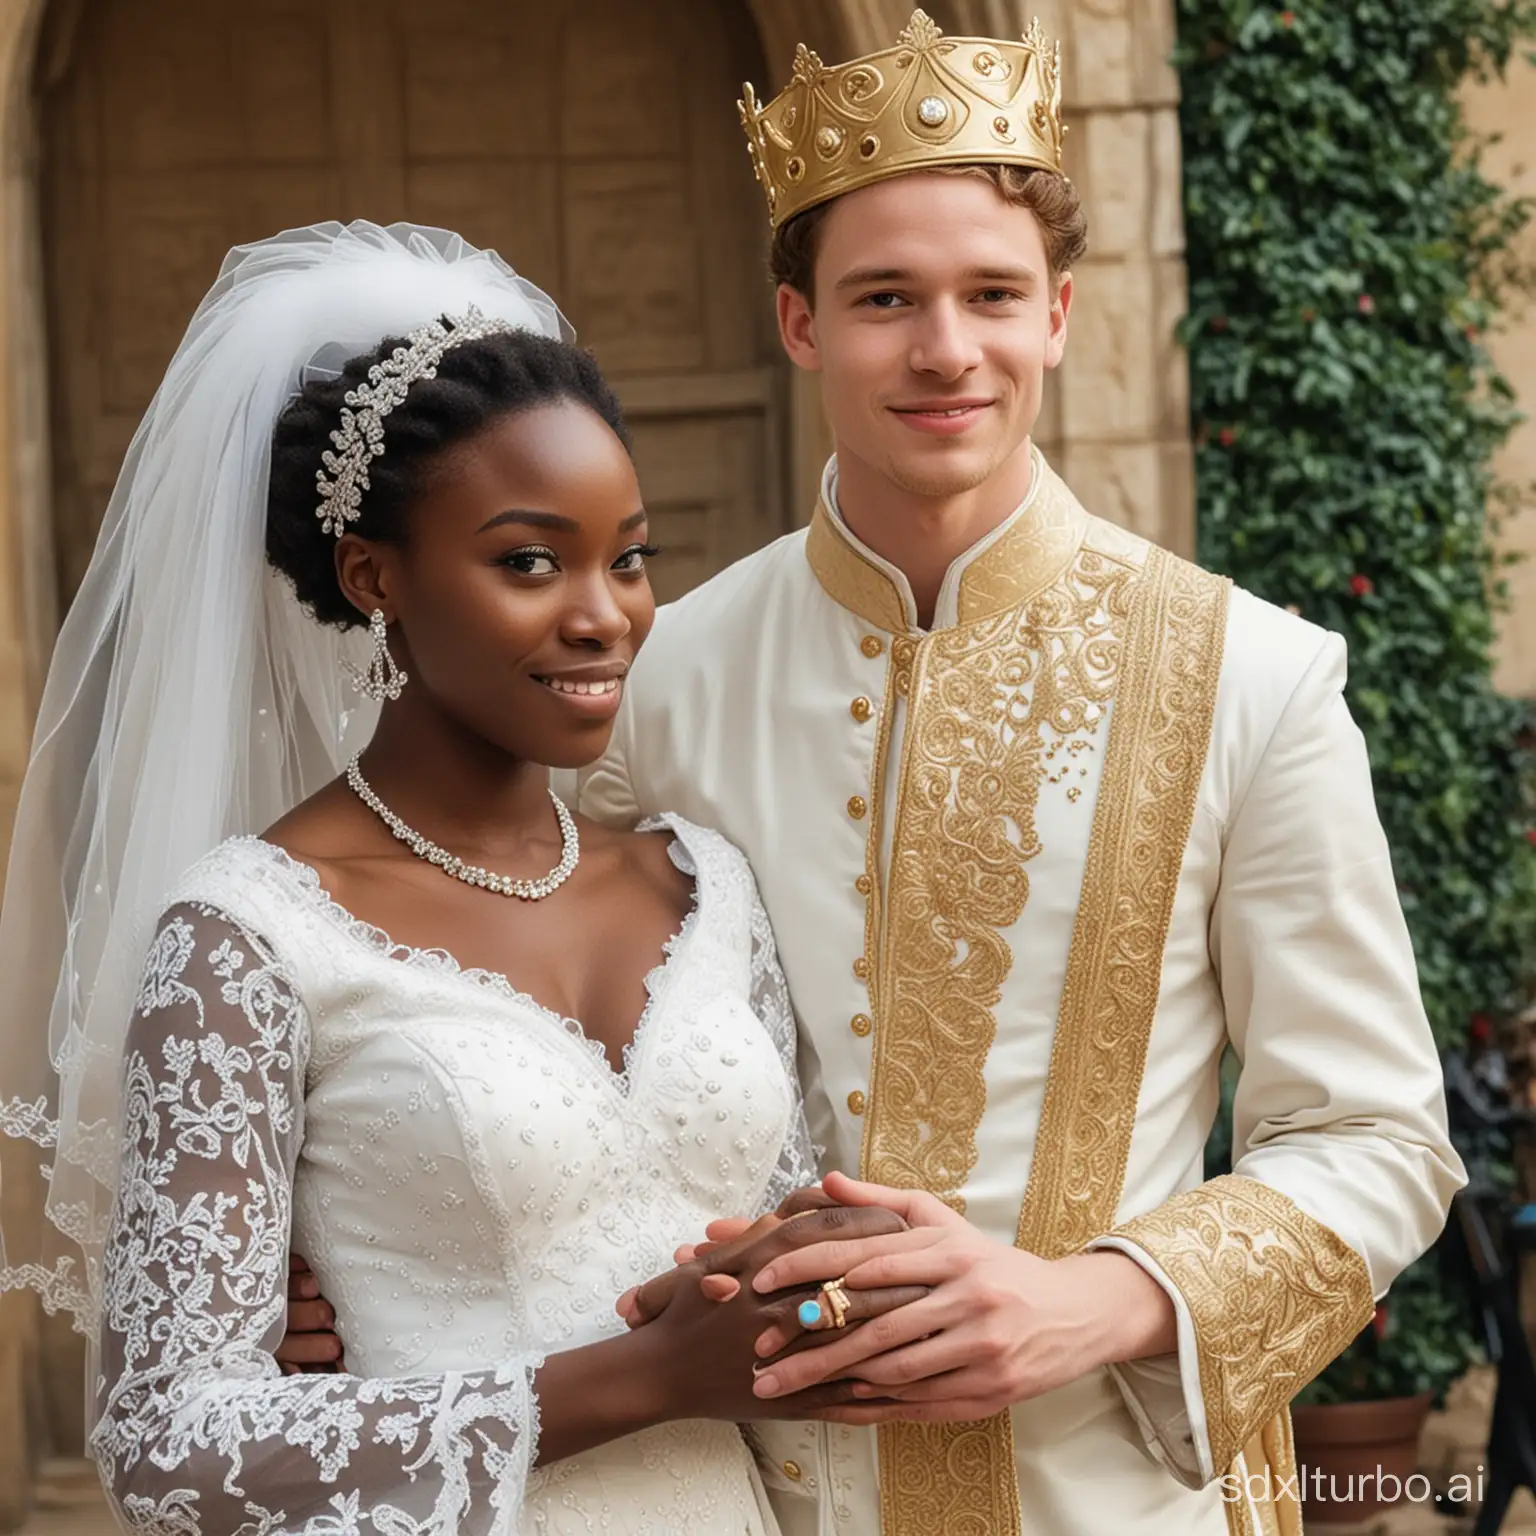 Multicultural-Wedding-African-Woman-and-Fairskinned-Prince-Exchange-Vows